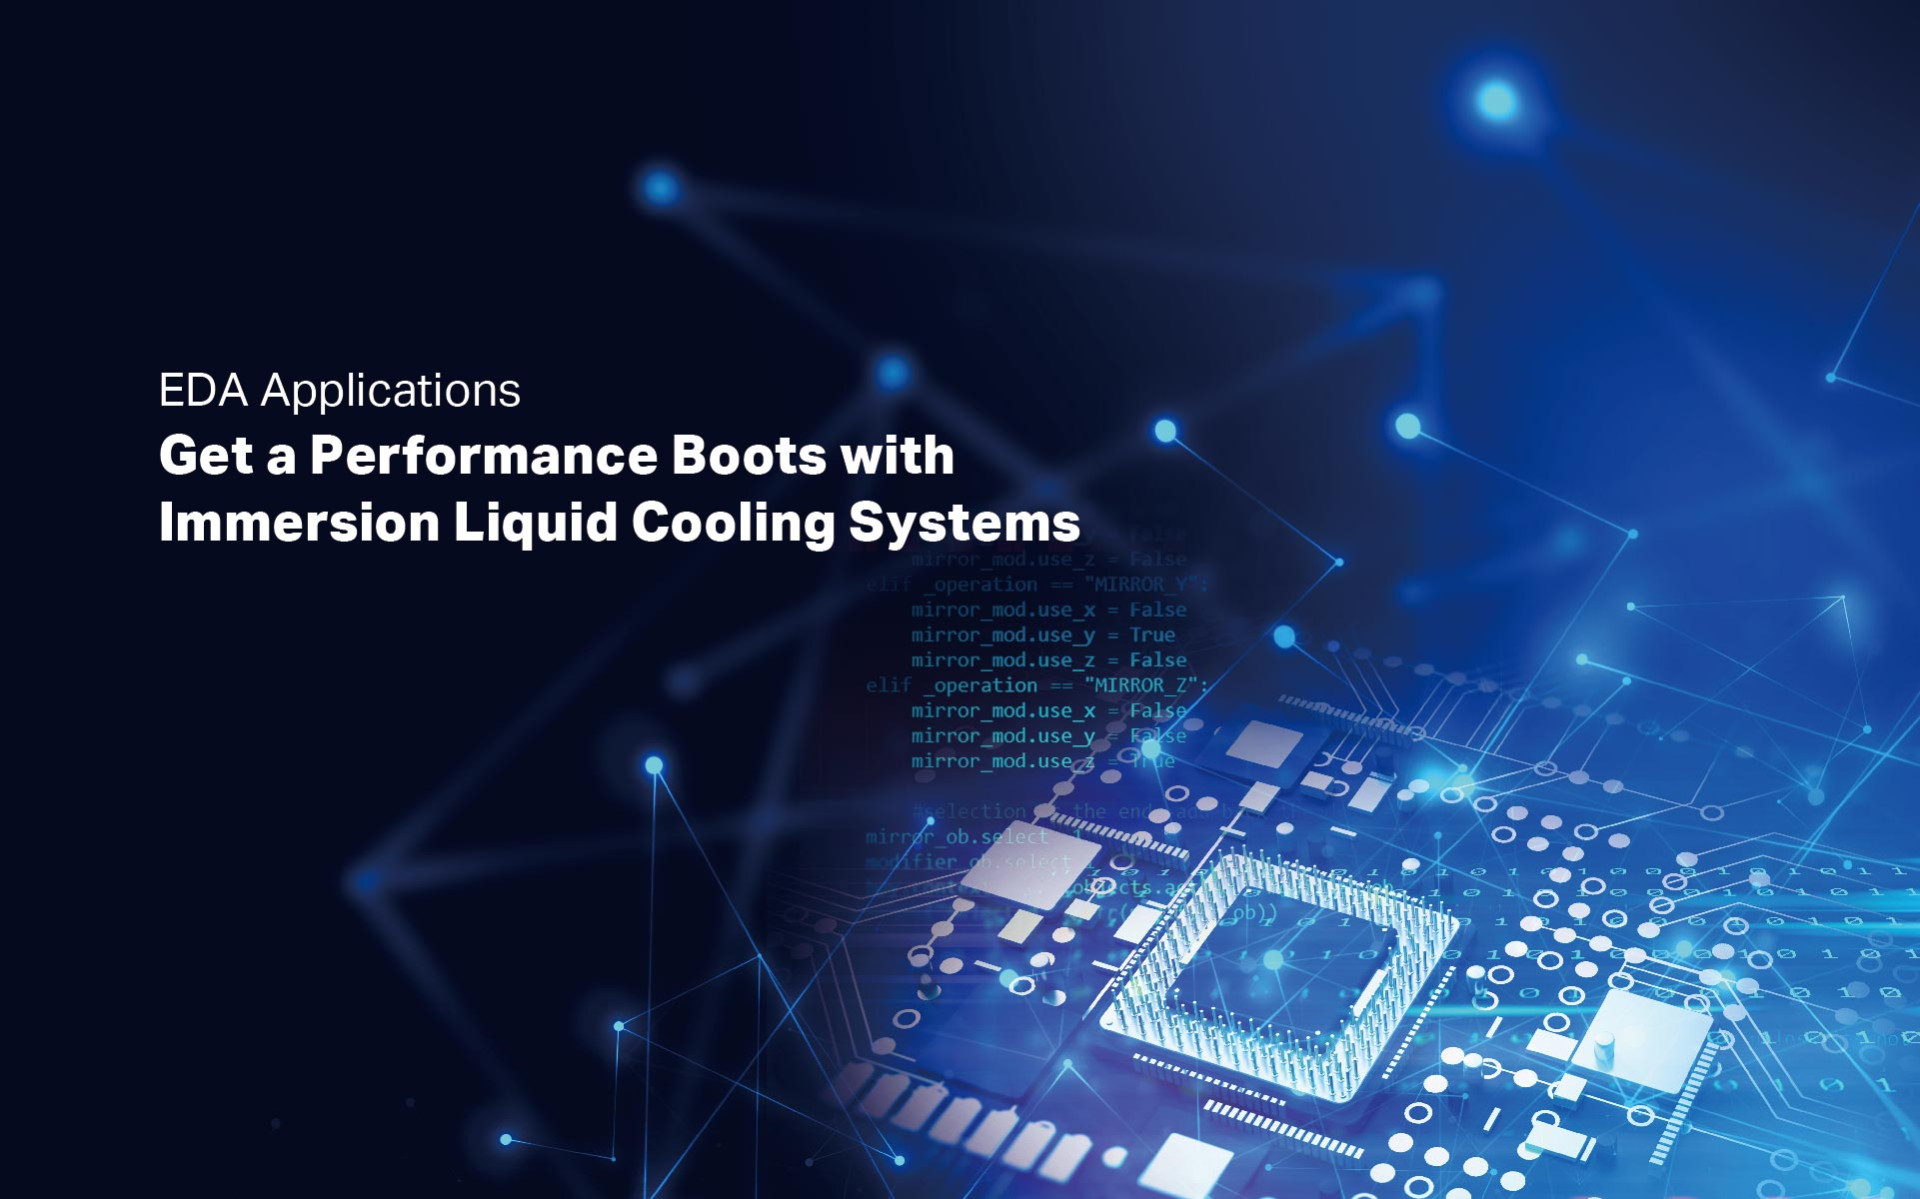  EDA Applications Get a Performance Boots with Immersion Liquid Cooling Systems 